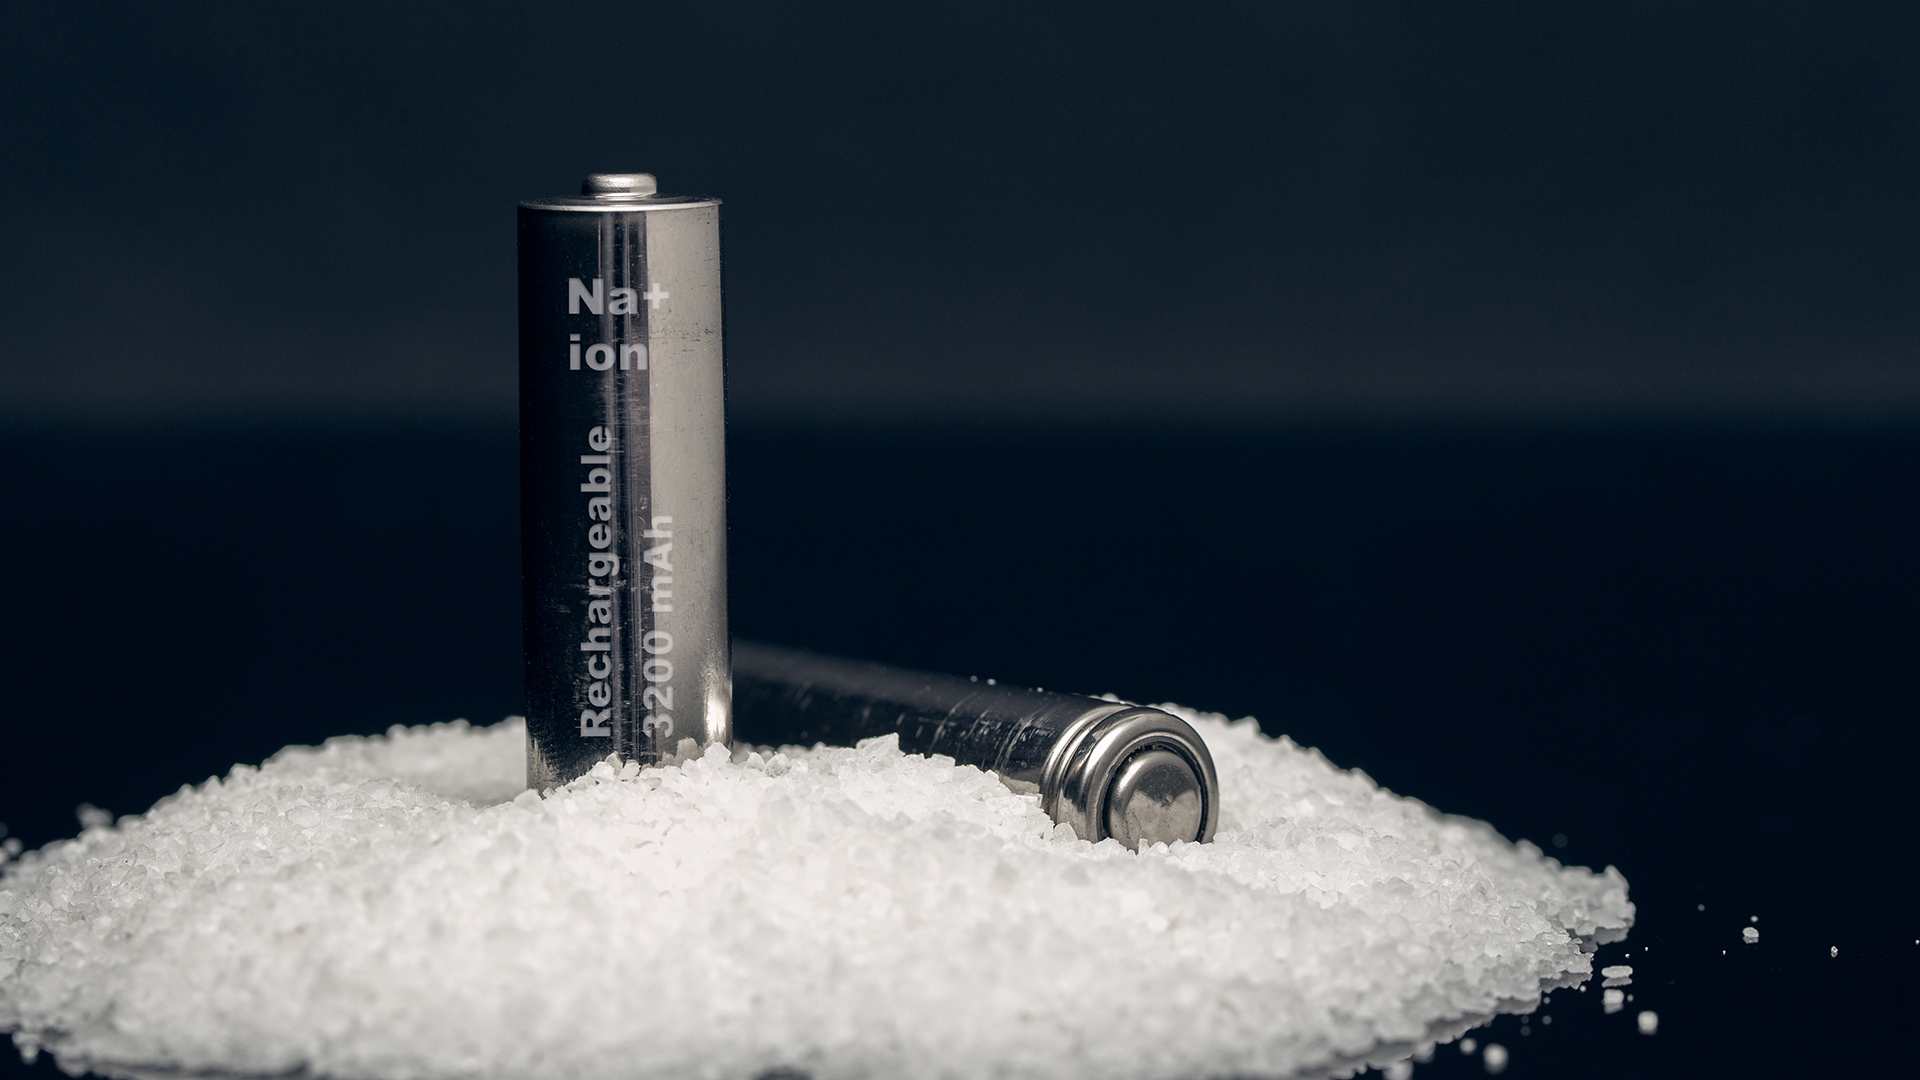 Upscaling sodium-ion batteries could prevent a critical minerals shortage